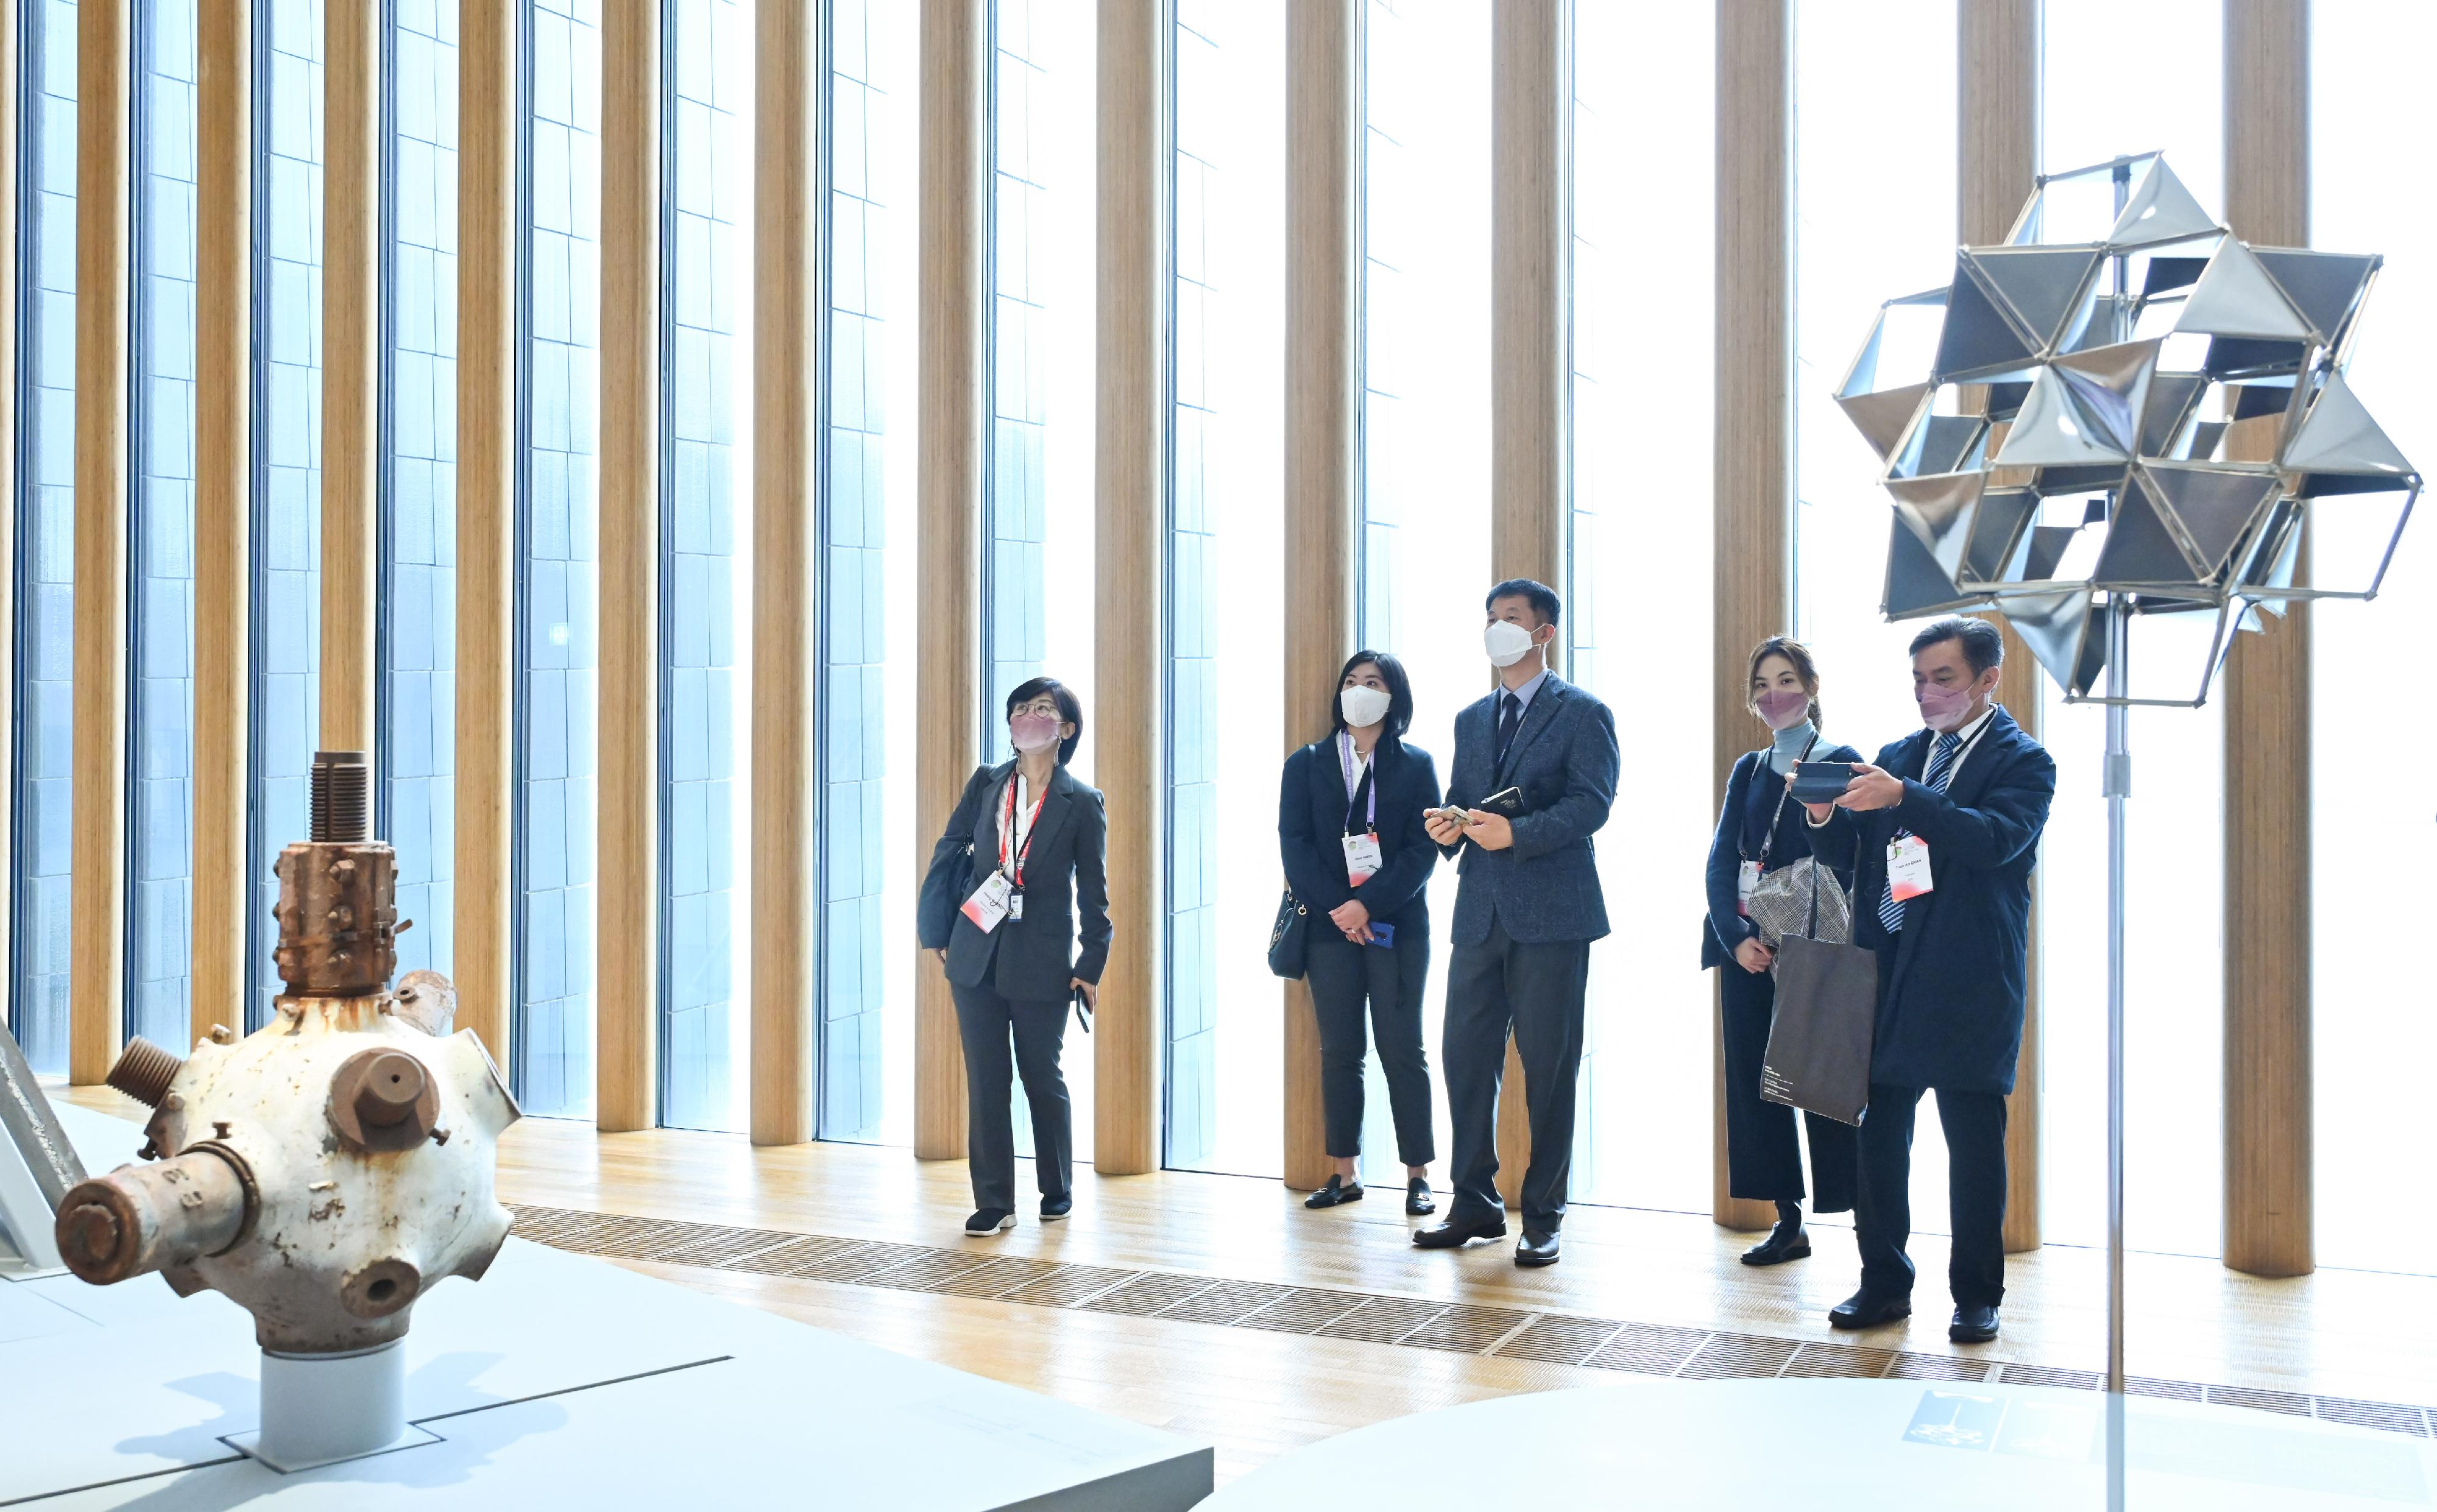 Participating delegations visited the M+ Museum of the West Kowloon Cultural District on December 14.